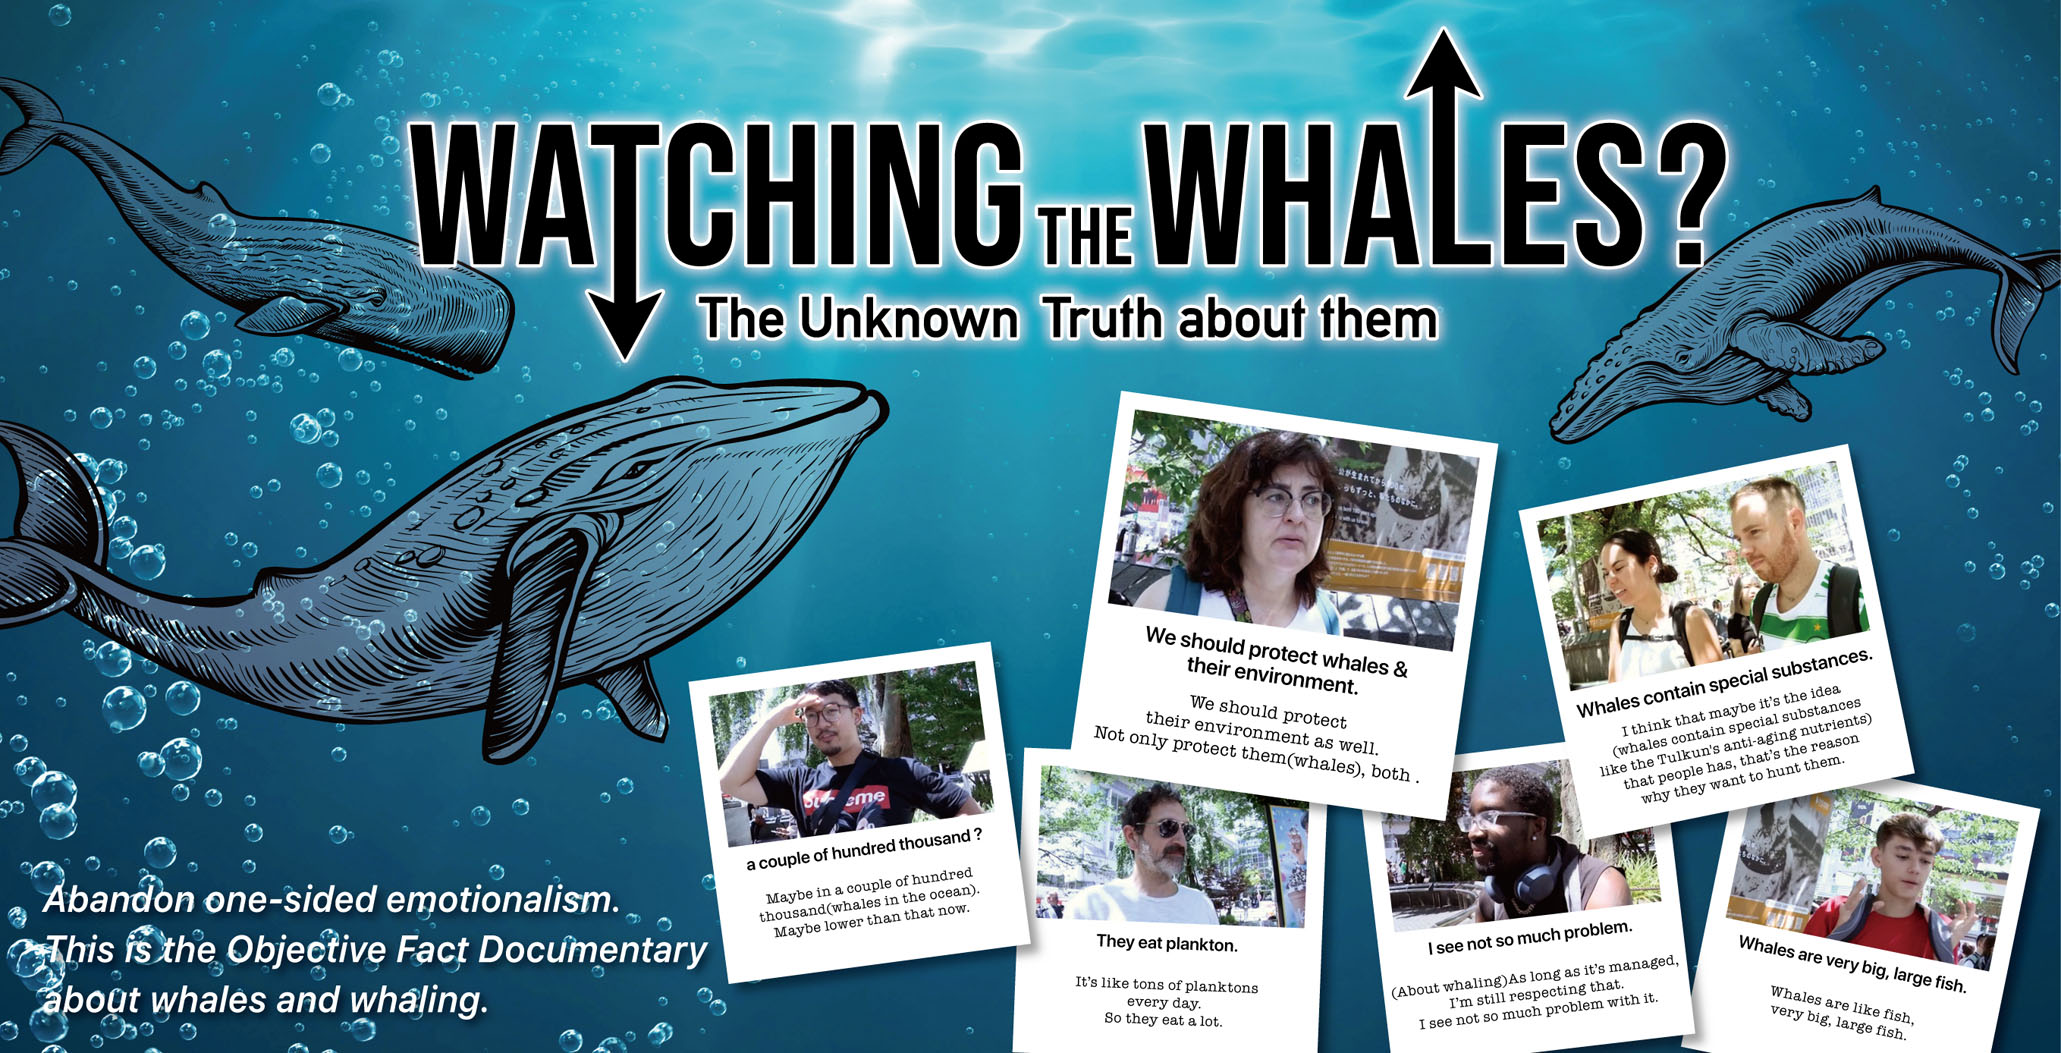 This is the Objective Fact Documentary about whales and whaling.